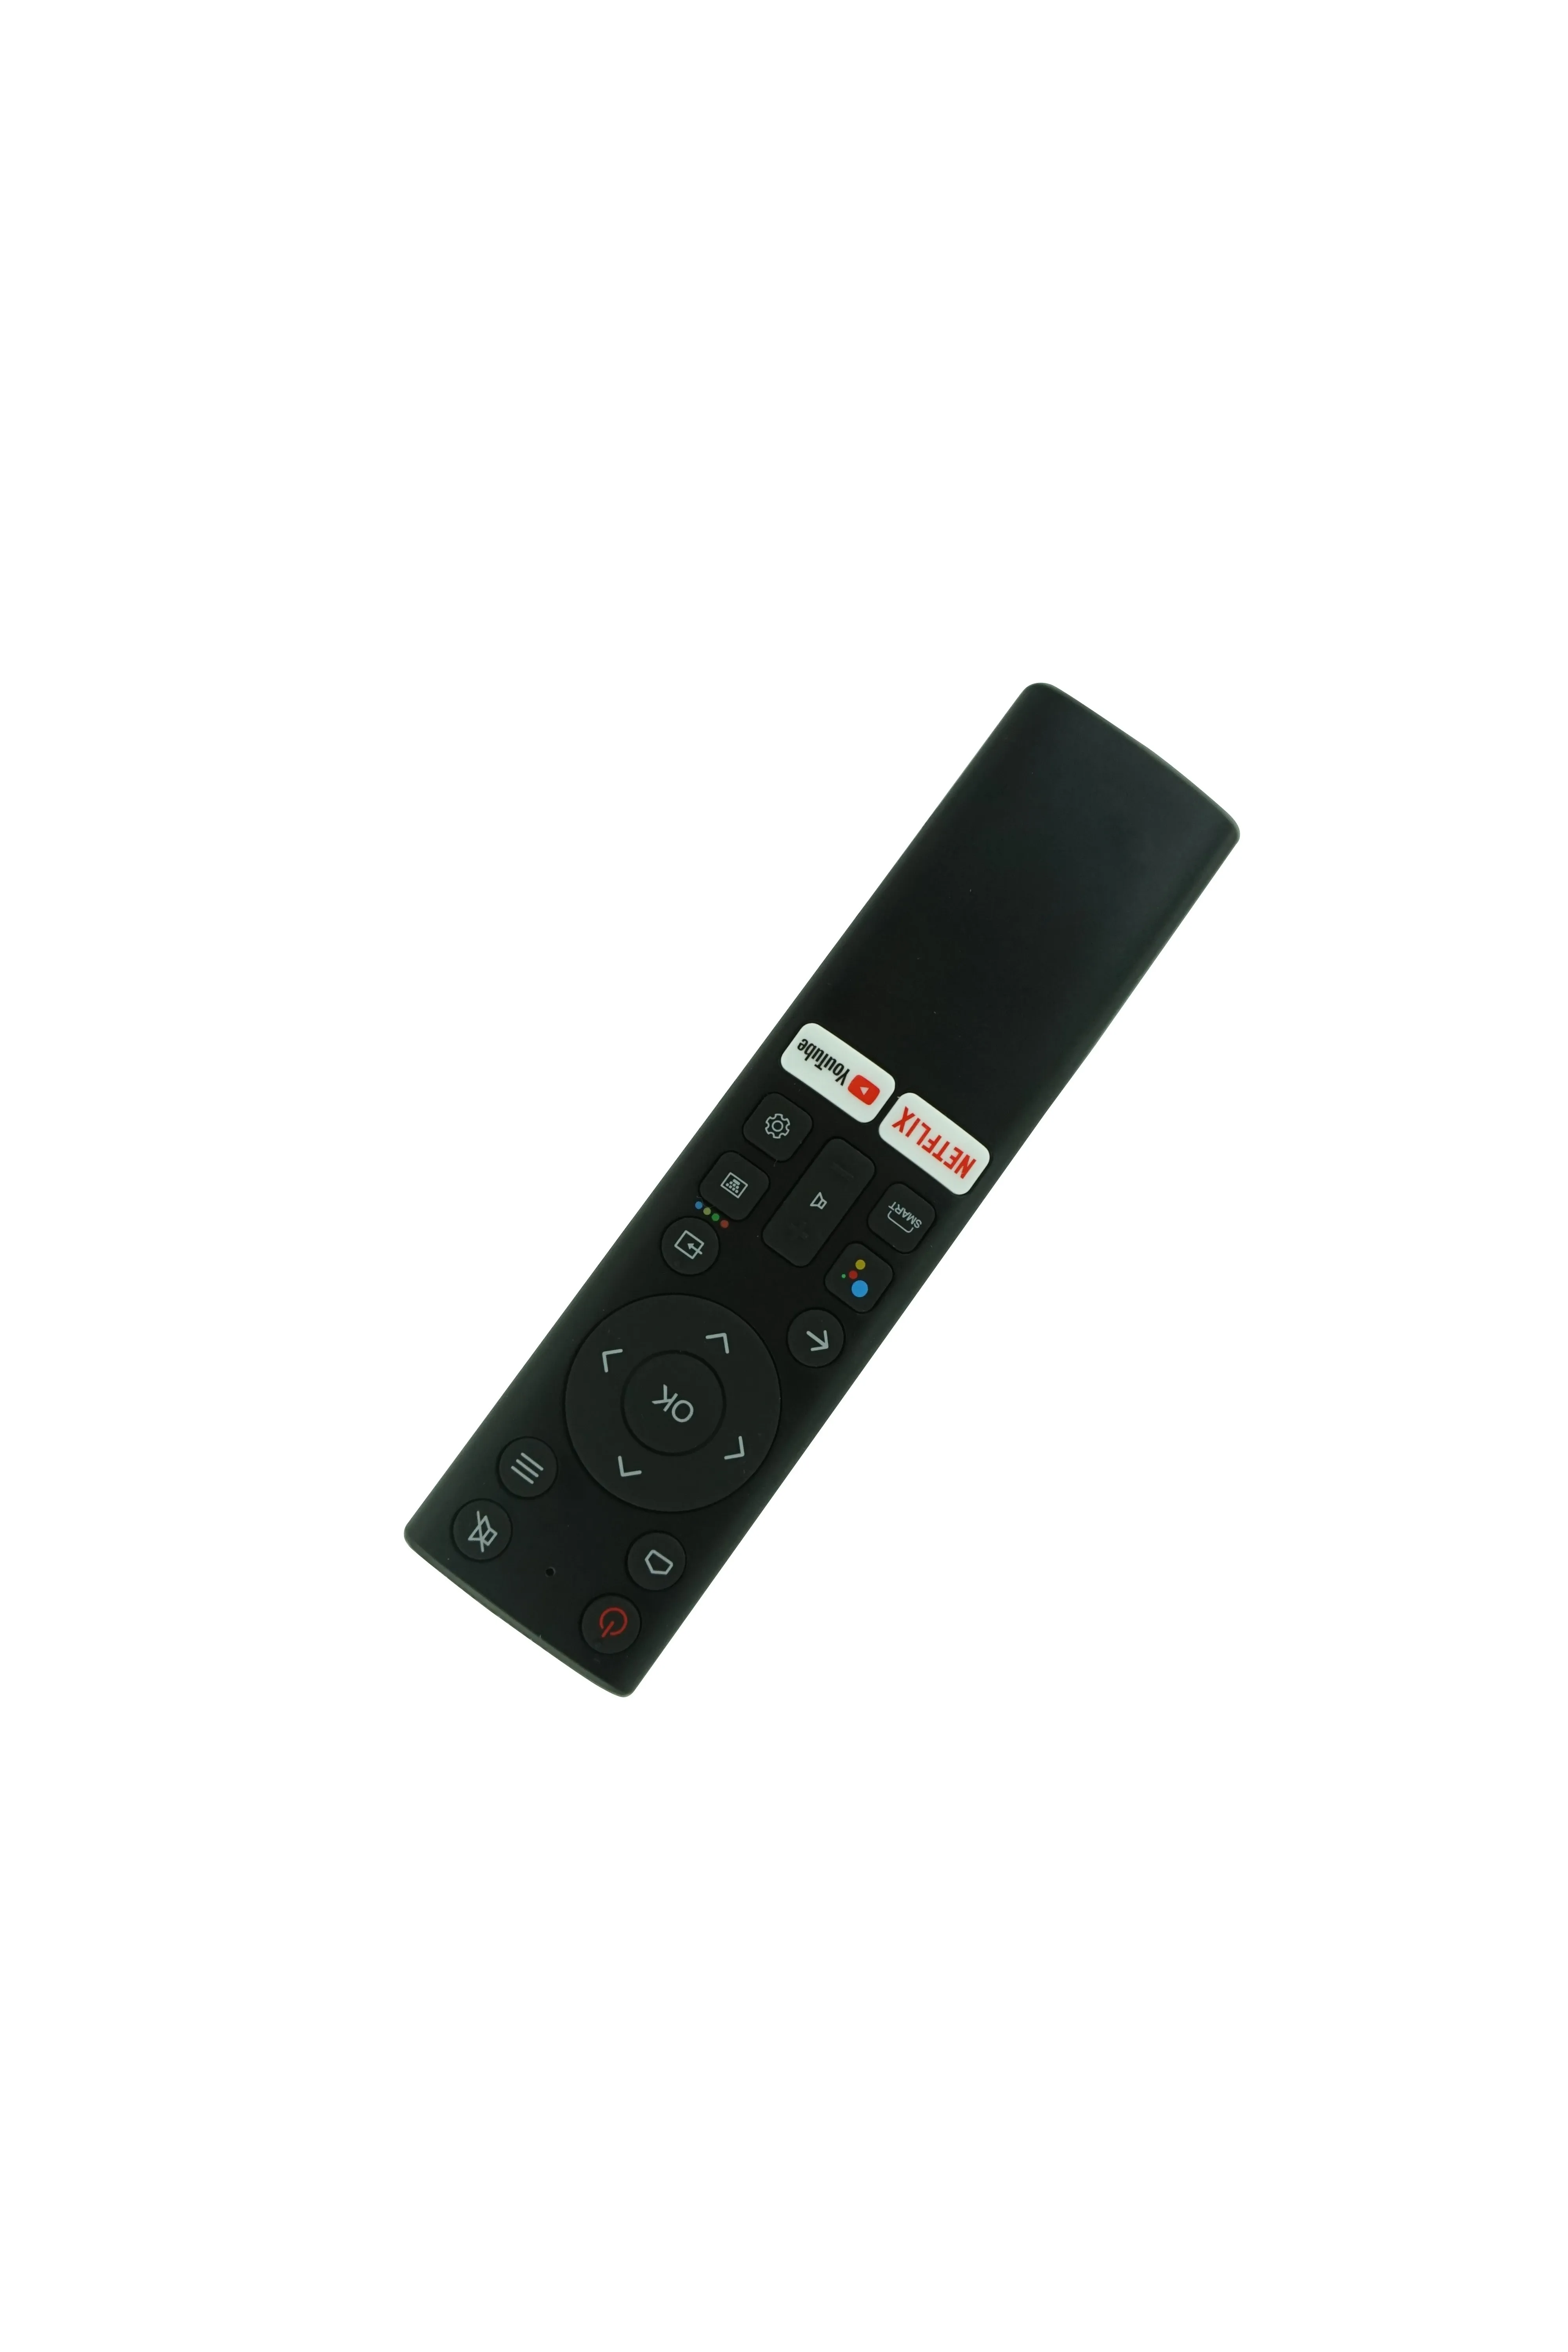 Voice Bluetooth Remote Control For Hitachi AND65FXUHD AND65FXUHD-B AND65FXUHD-M AND65FXUHD-F Google Assistant Smart LED LCD HDTV Android TV TELEVISION